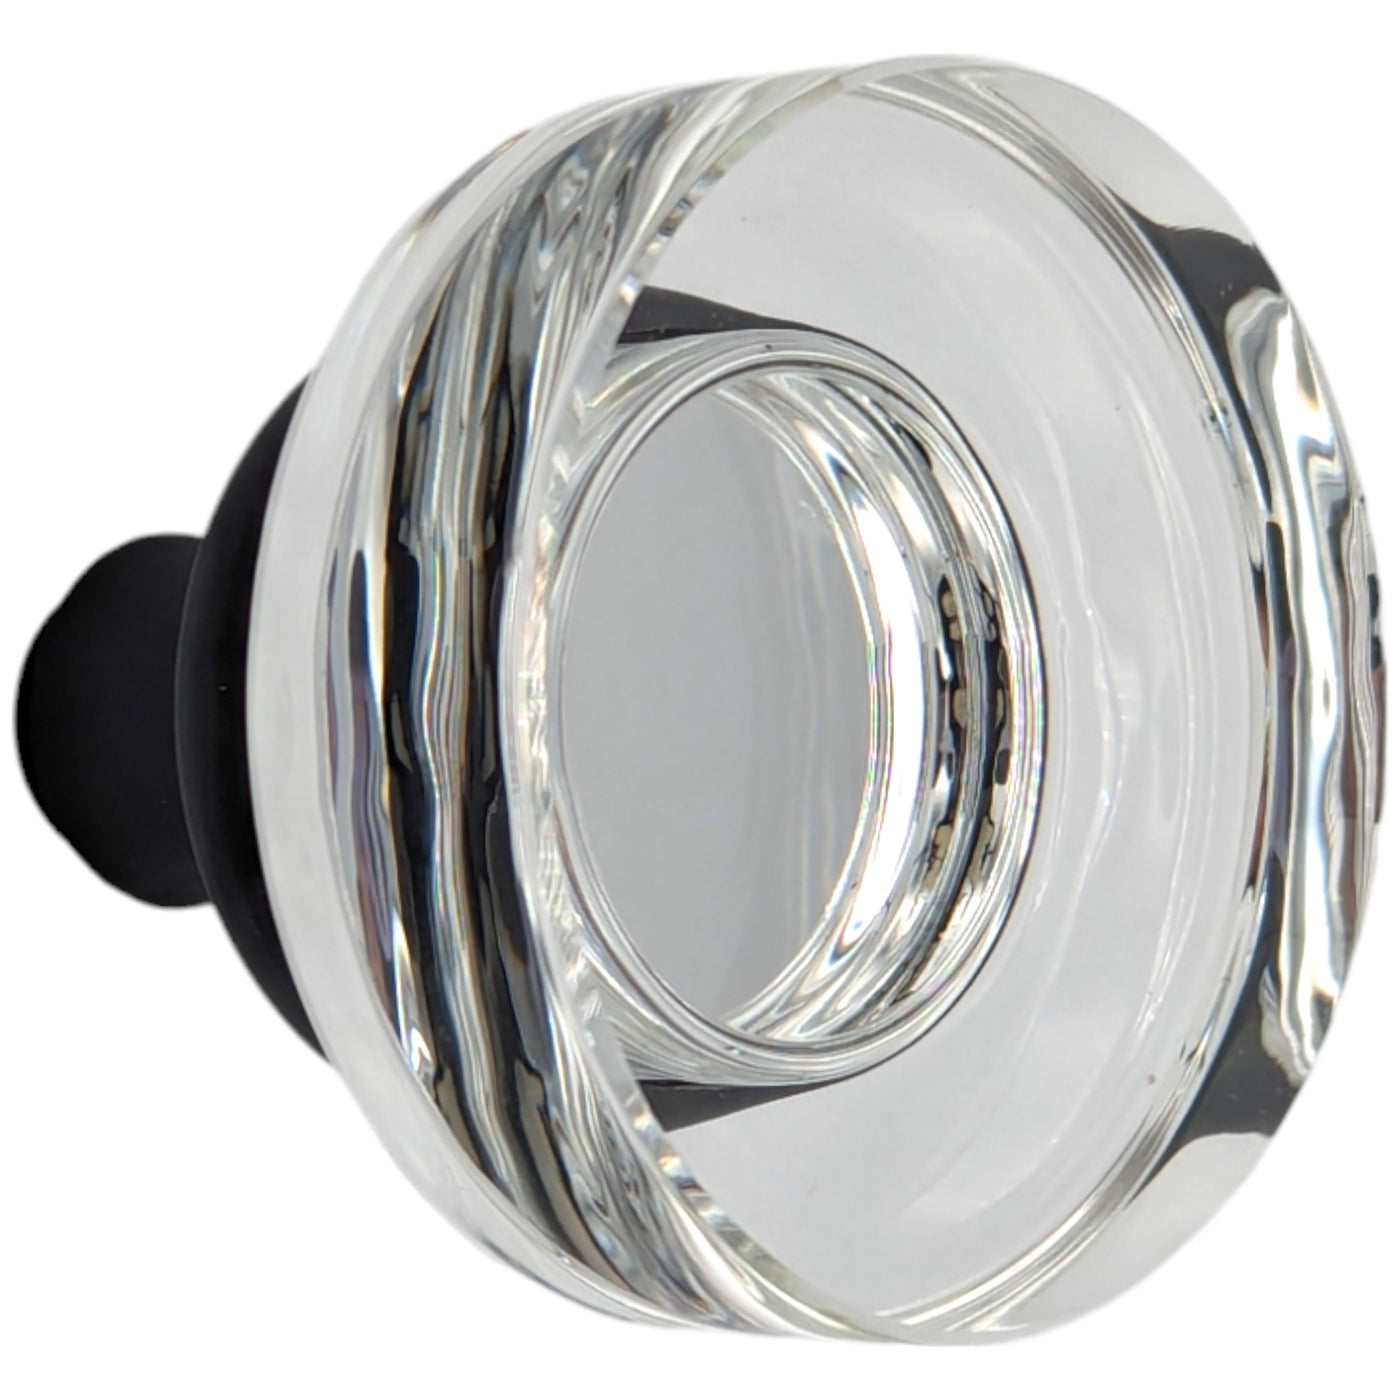 Disc Crystal Spare Door Knob Set (Several Finishes Available